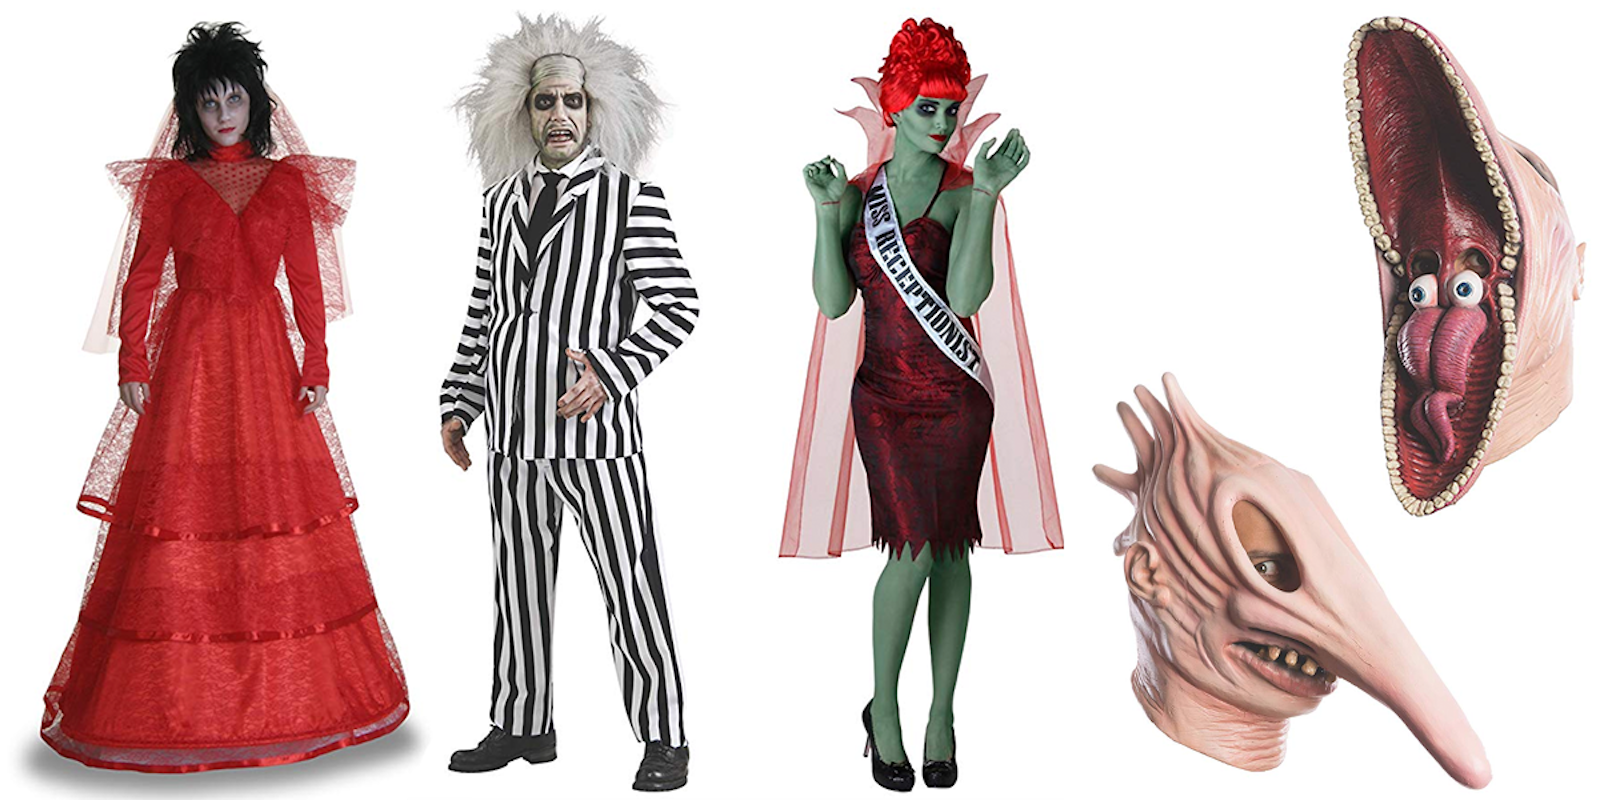 group costumes